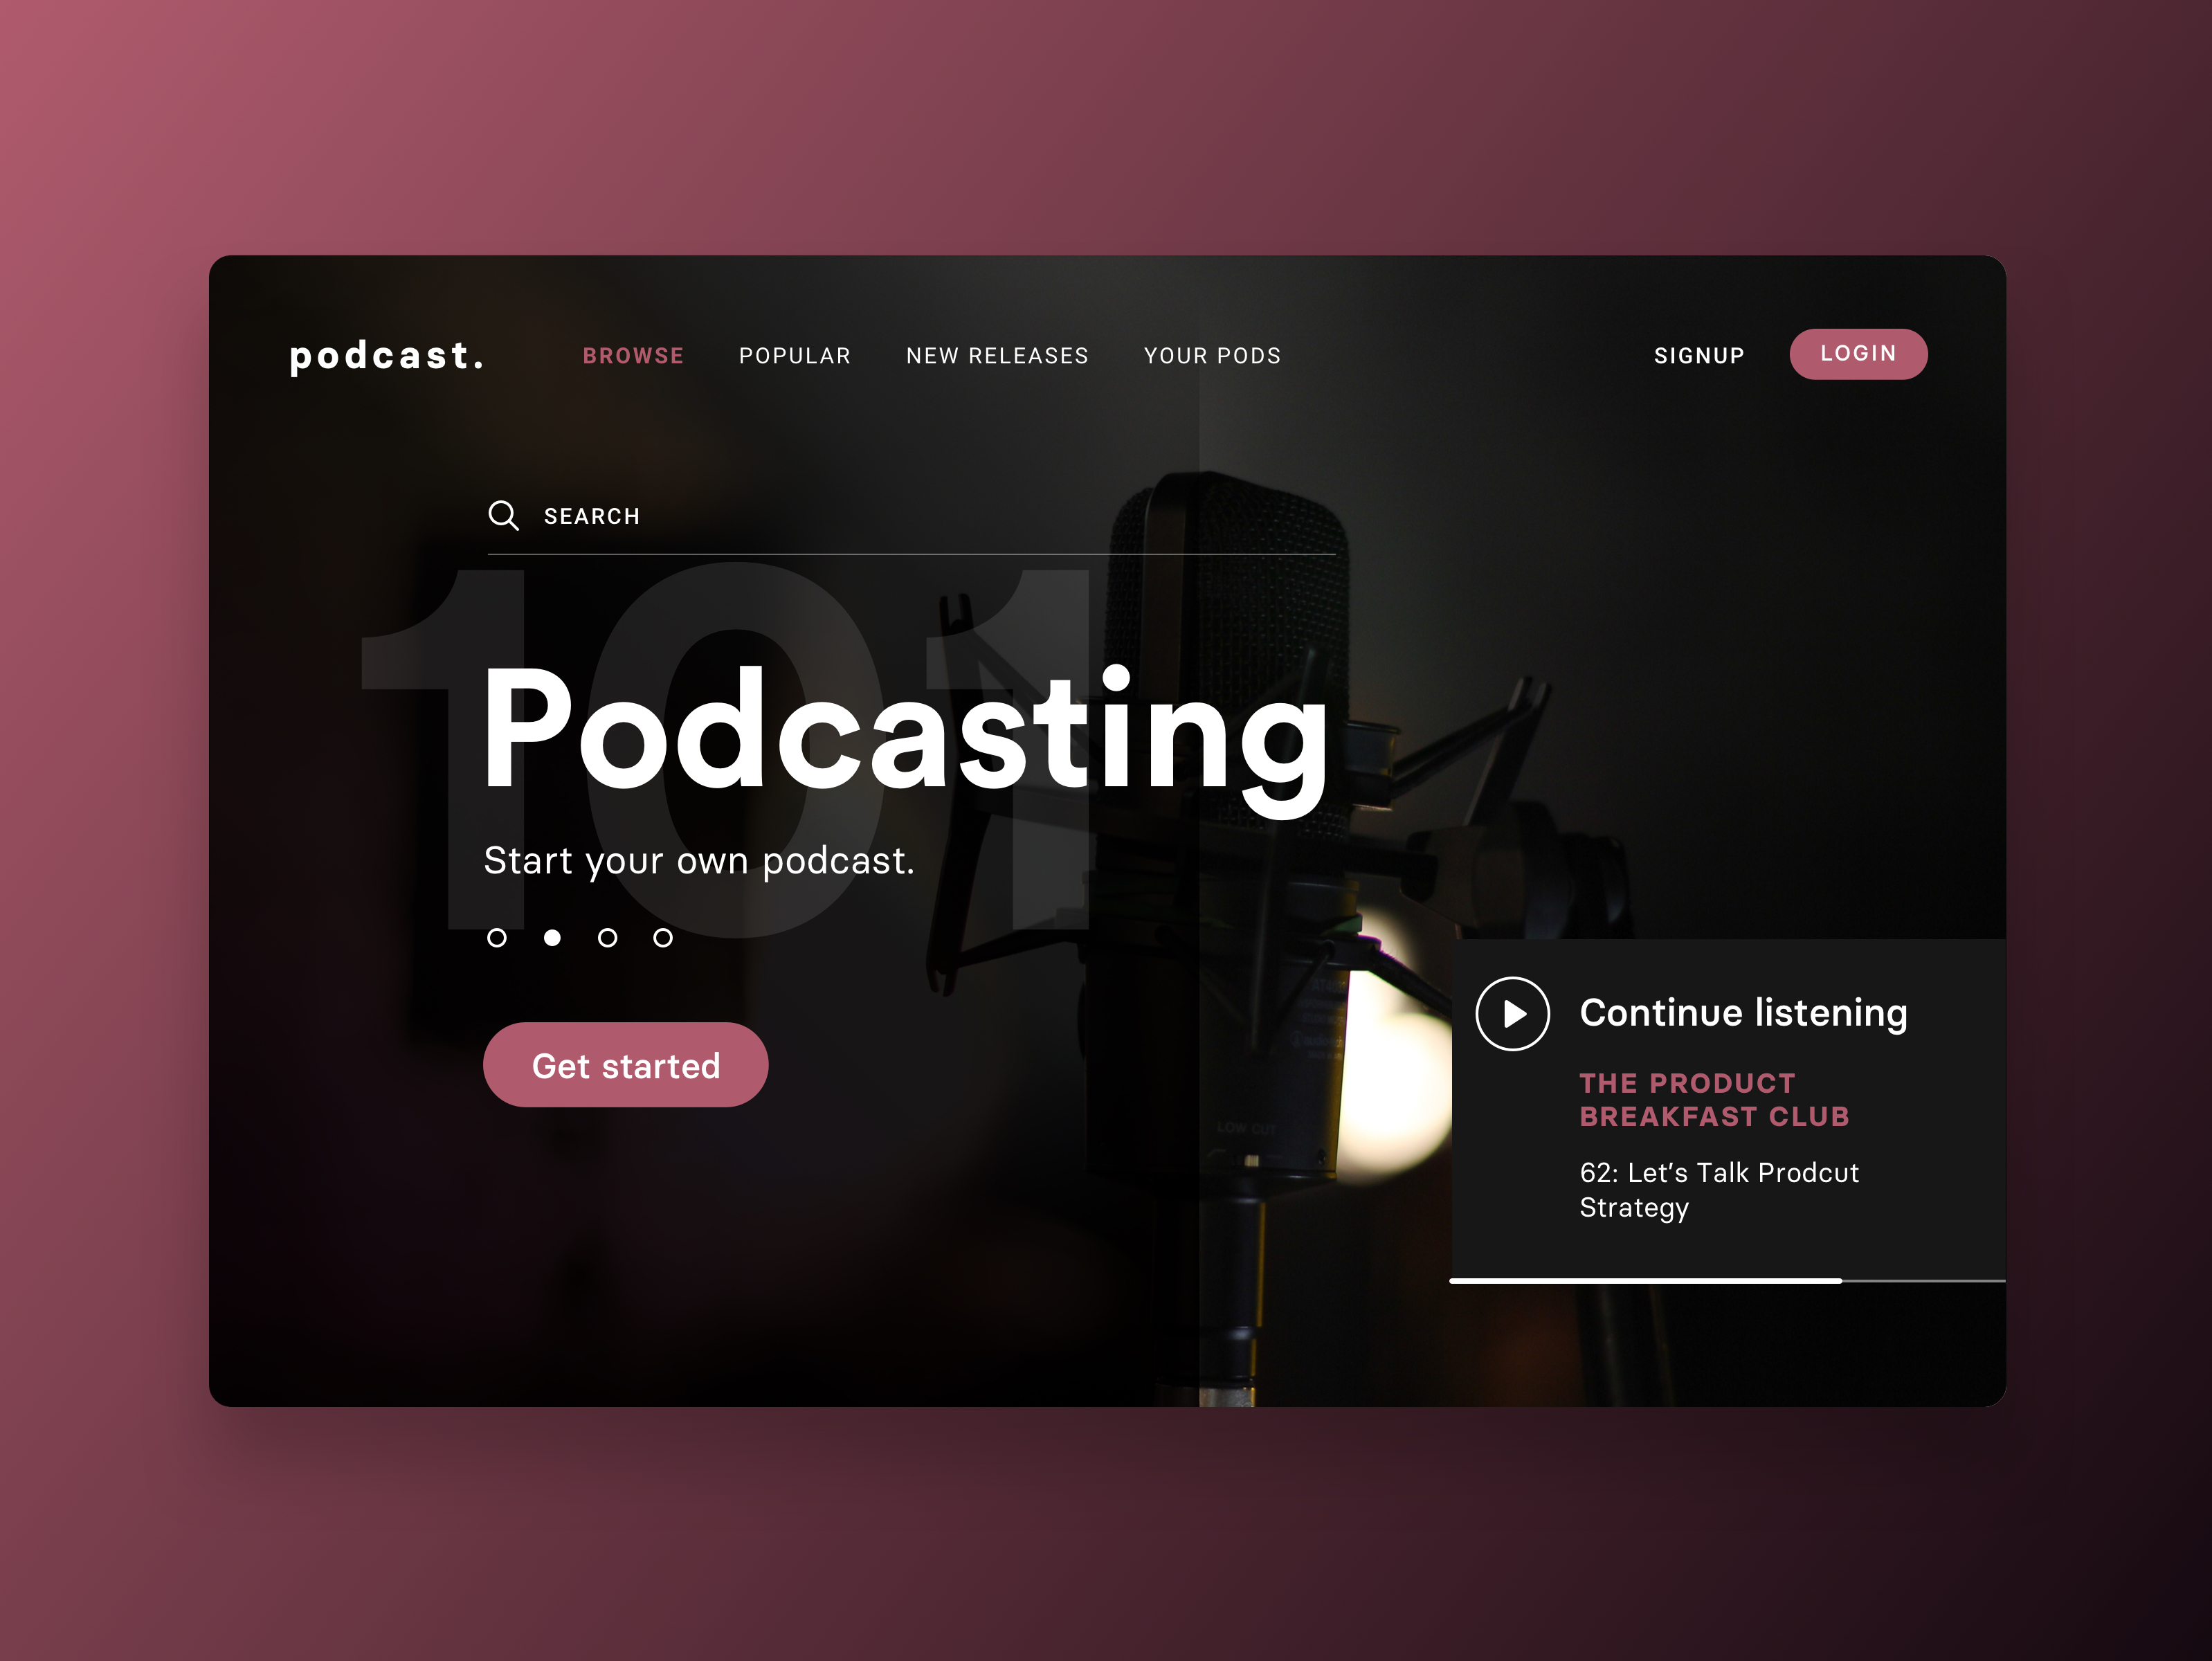 Podcasting by Loz Williams on Dribbble